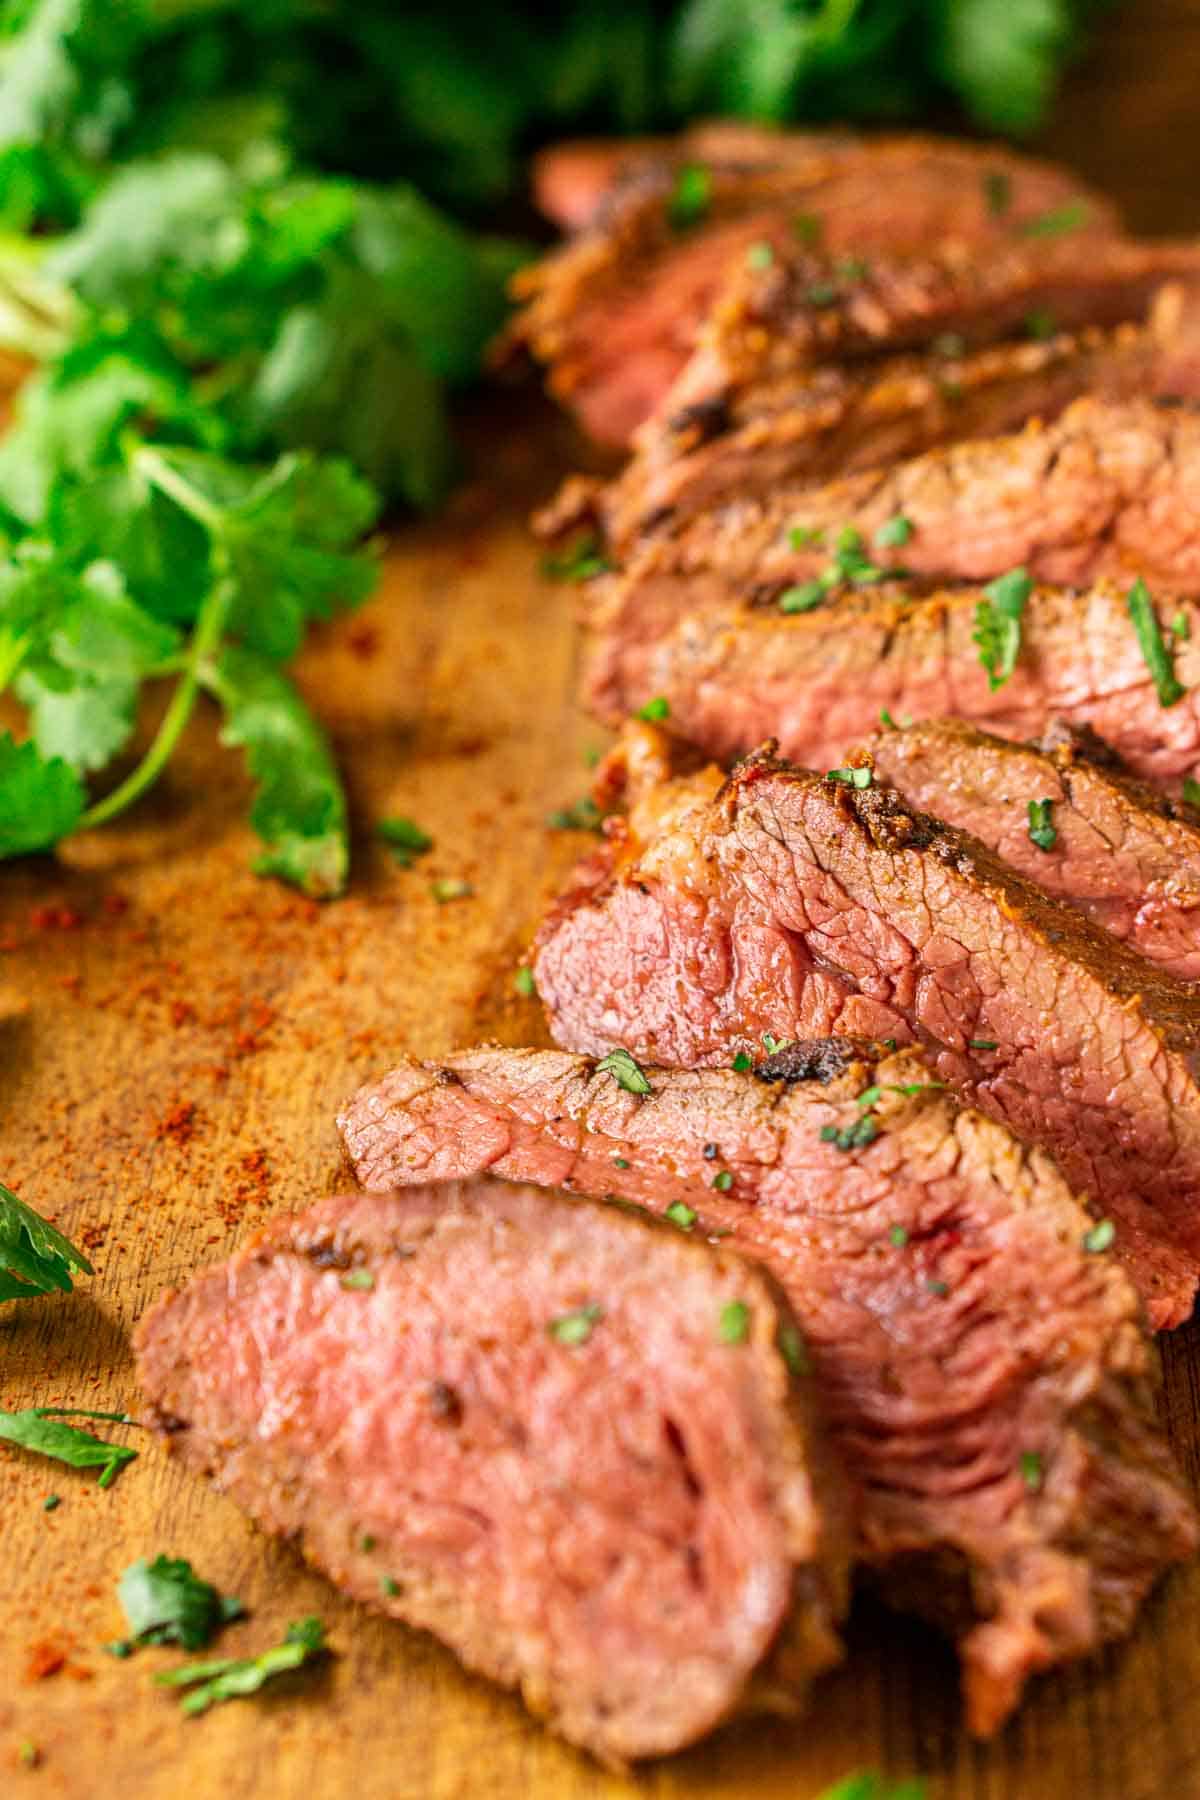 A close-up shot of the tri tip cut into slices on a wooden cutting board with chopped cilantro to the side.